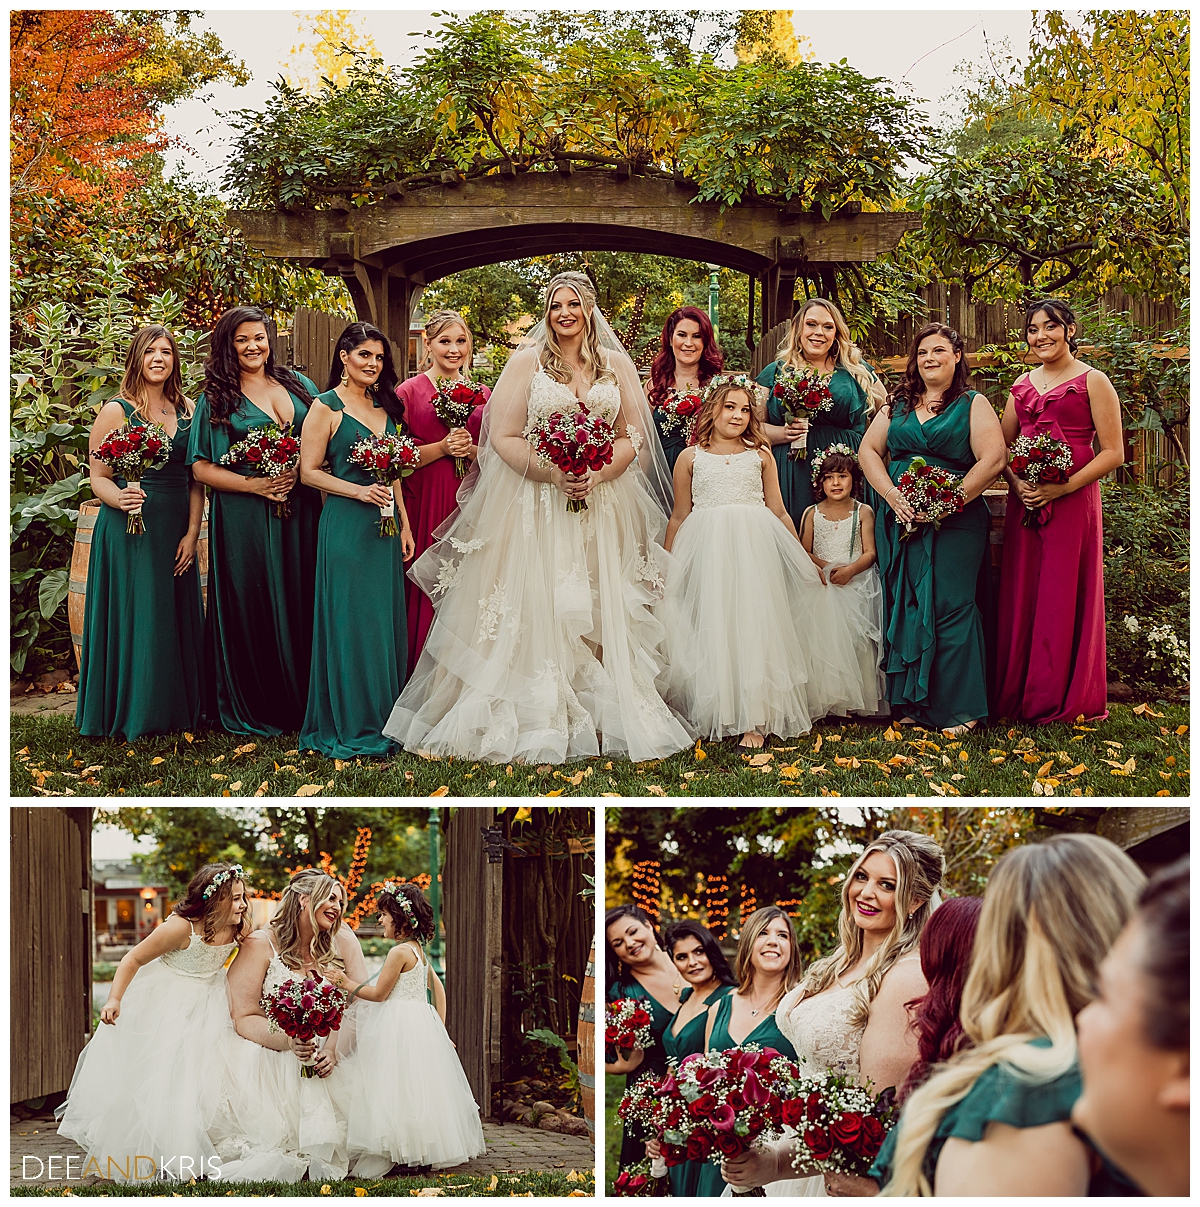 Three images: top image of bride lined up with Bridal Party. Bottom left image of bride kneeling down laughing with two flower girls. Bottom right DOF image of bride and bridesmaids looking at each other.